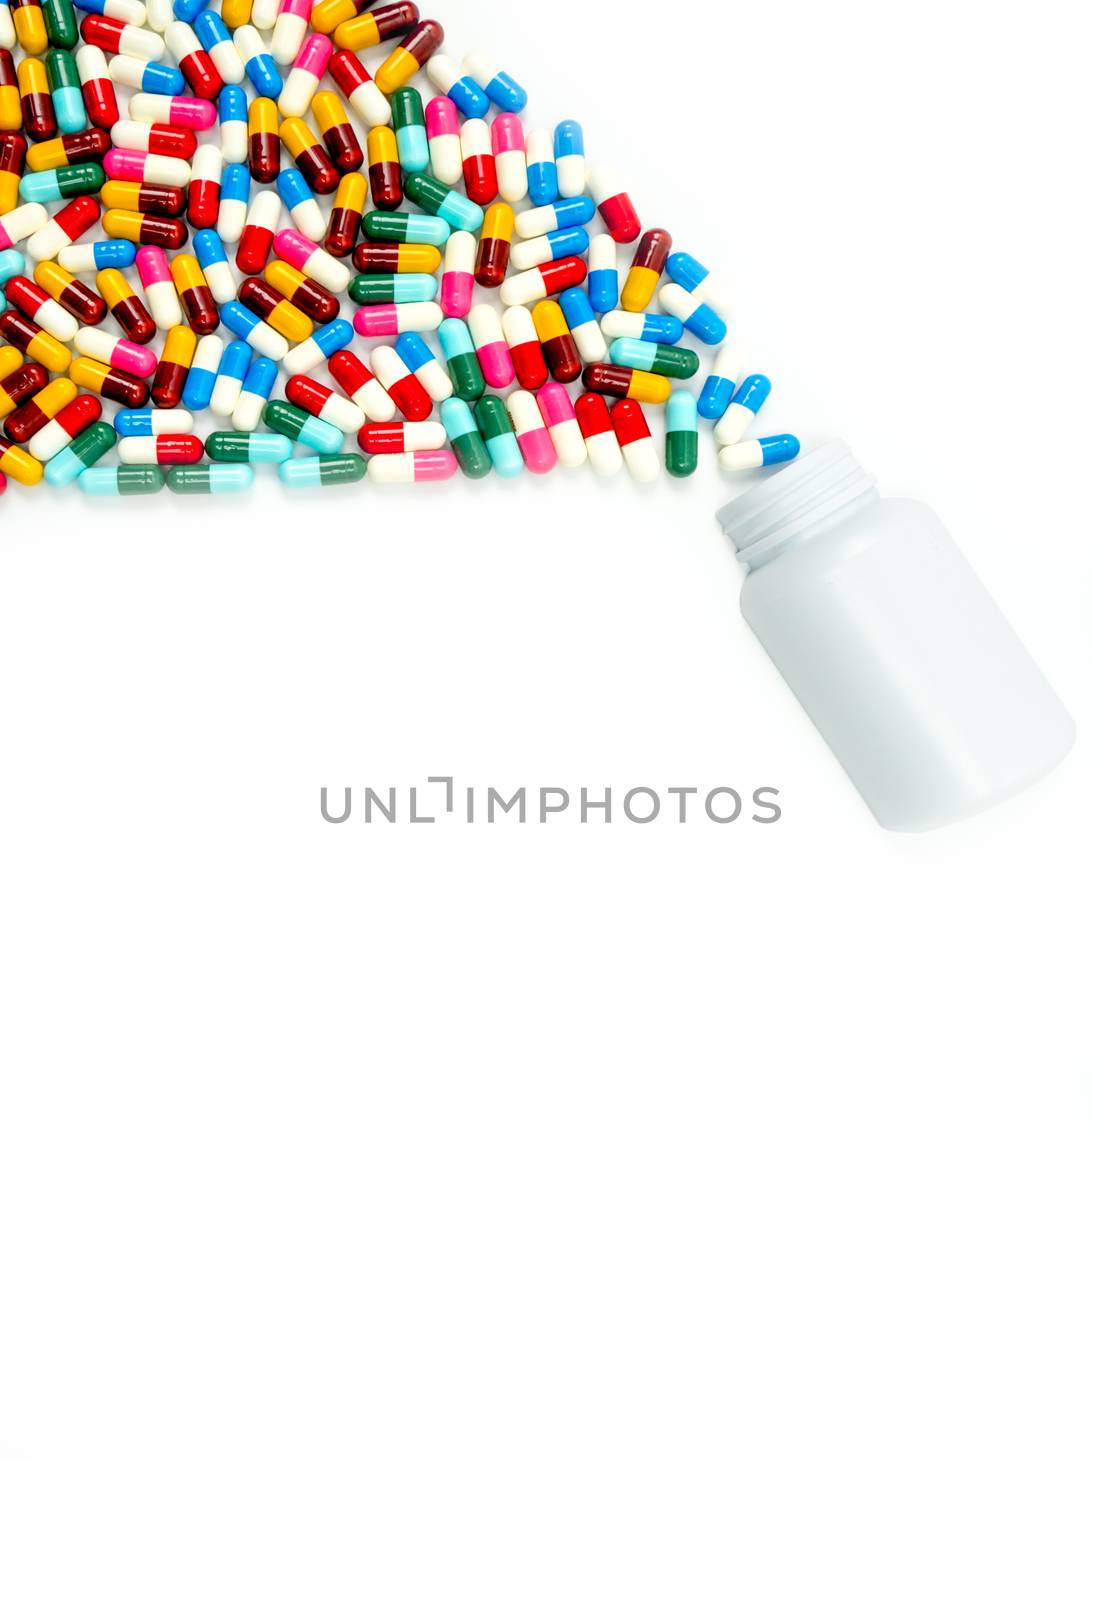 Antibiotic capsules spilling out of pill bottle on white background with copy space, just add your own text. Drug resistance concept. Antibiotics drug use with reasonable and global healthcare concept. Pharmaceutical industry. Pharmacy background.